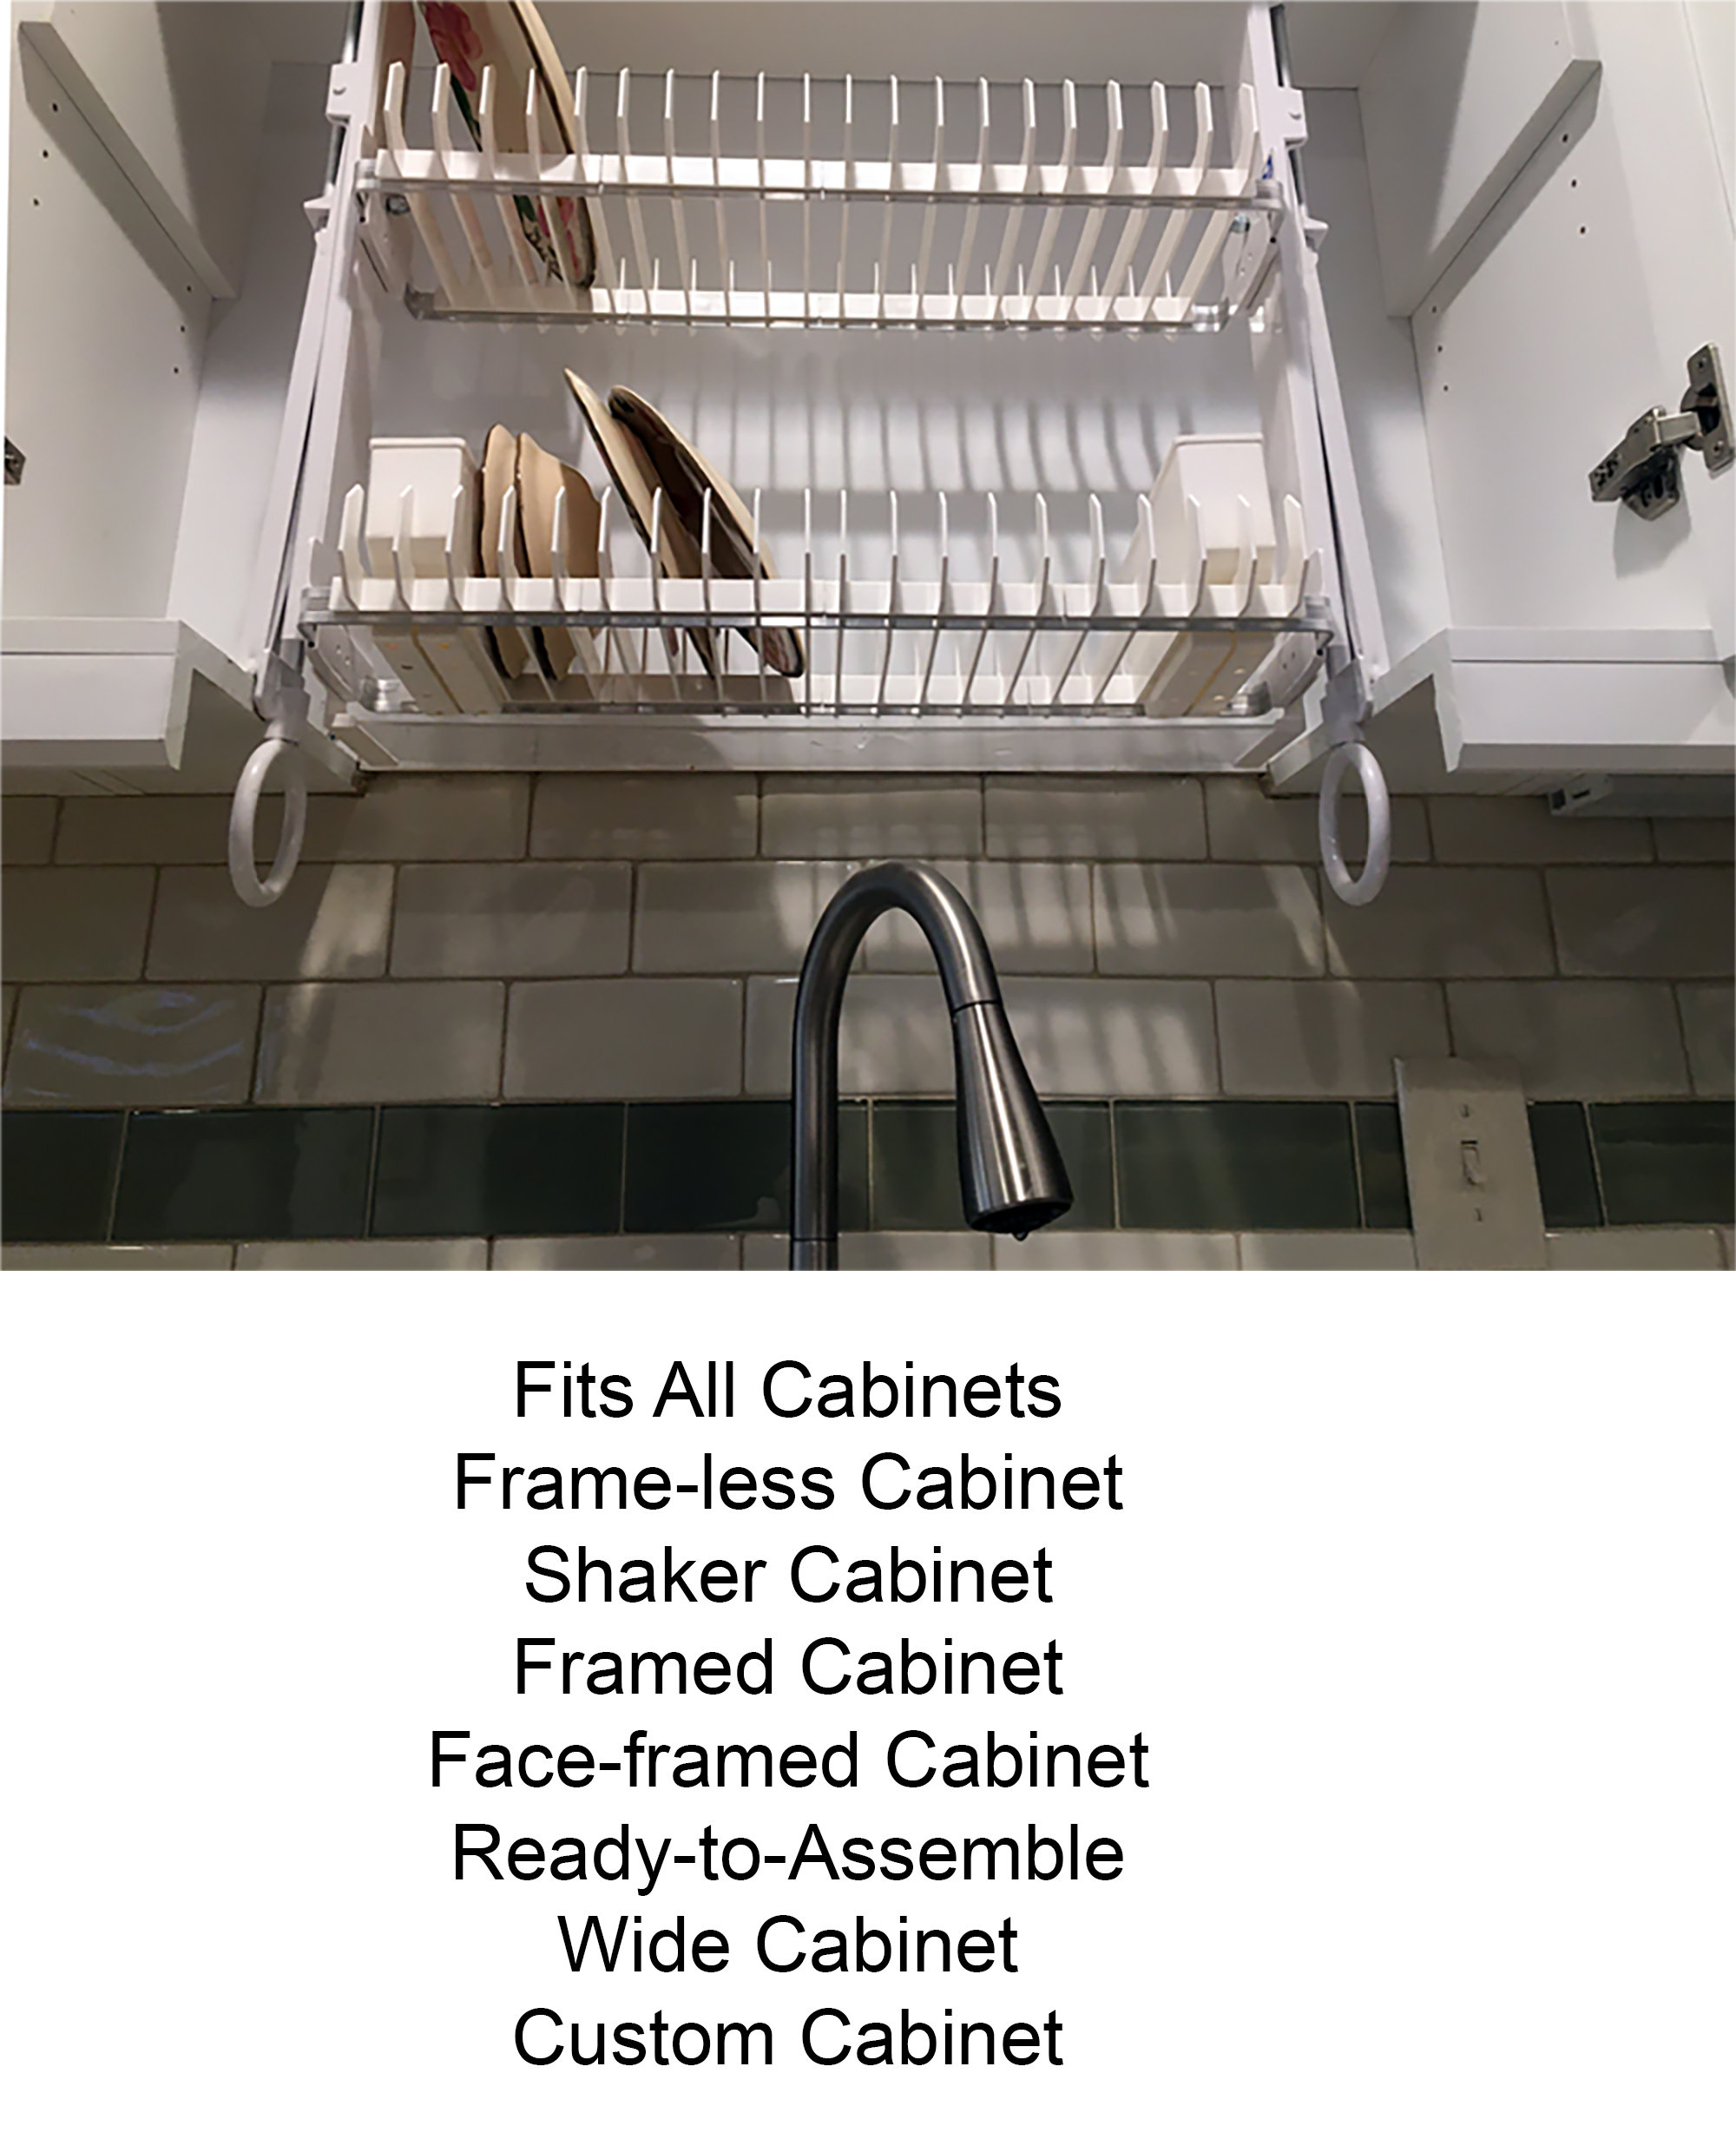 Buy CUSTOM Dish Drying Rack In-cabinet Over Sink. Static Dish Rack Online  in India 